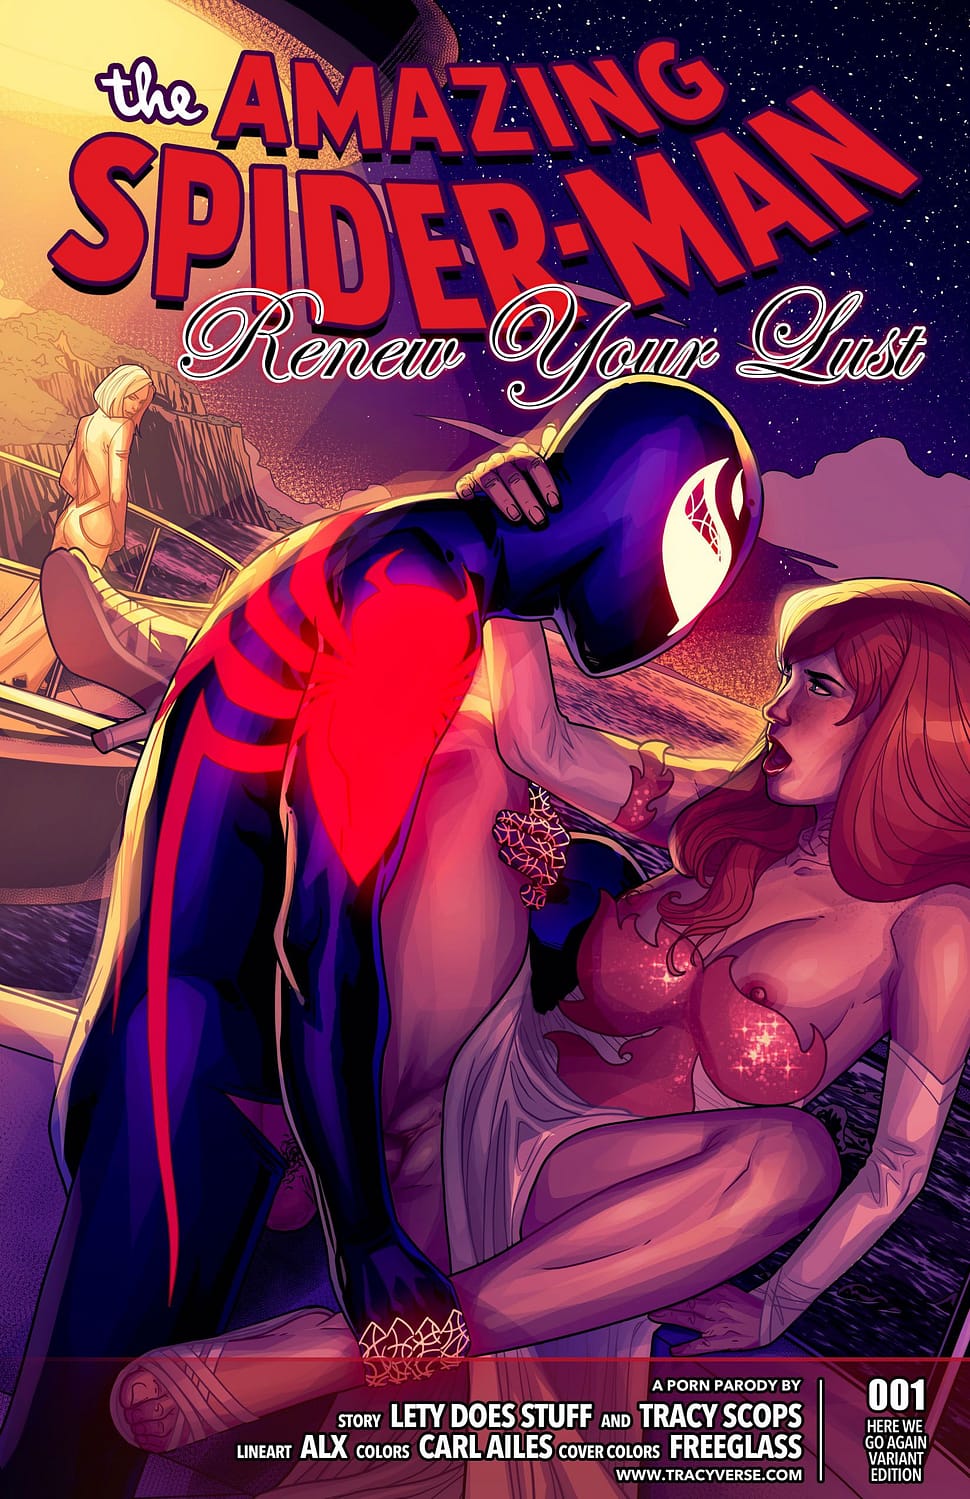 Renew Your Lust (The Amazing Spider-Man) [Tracy Scops]